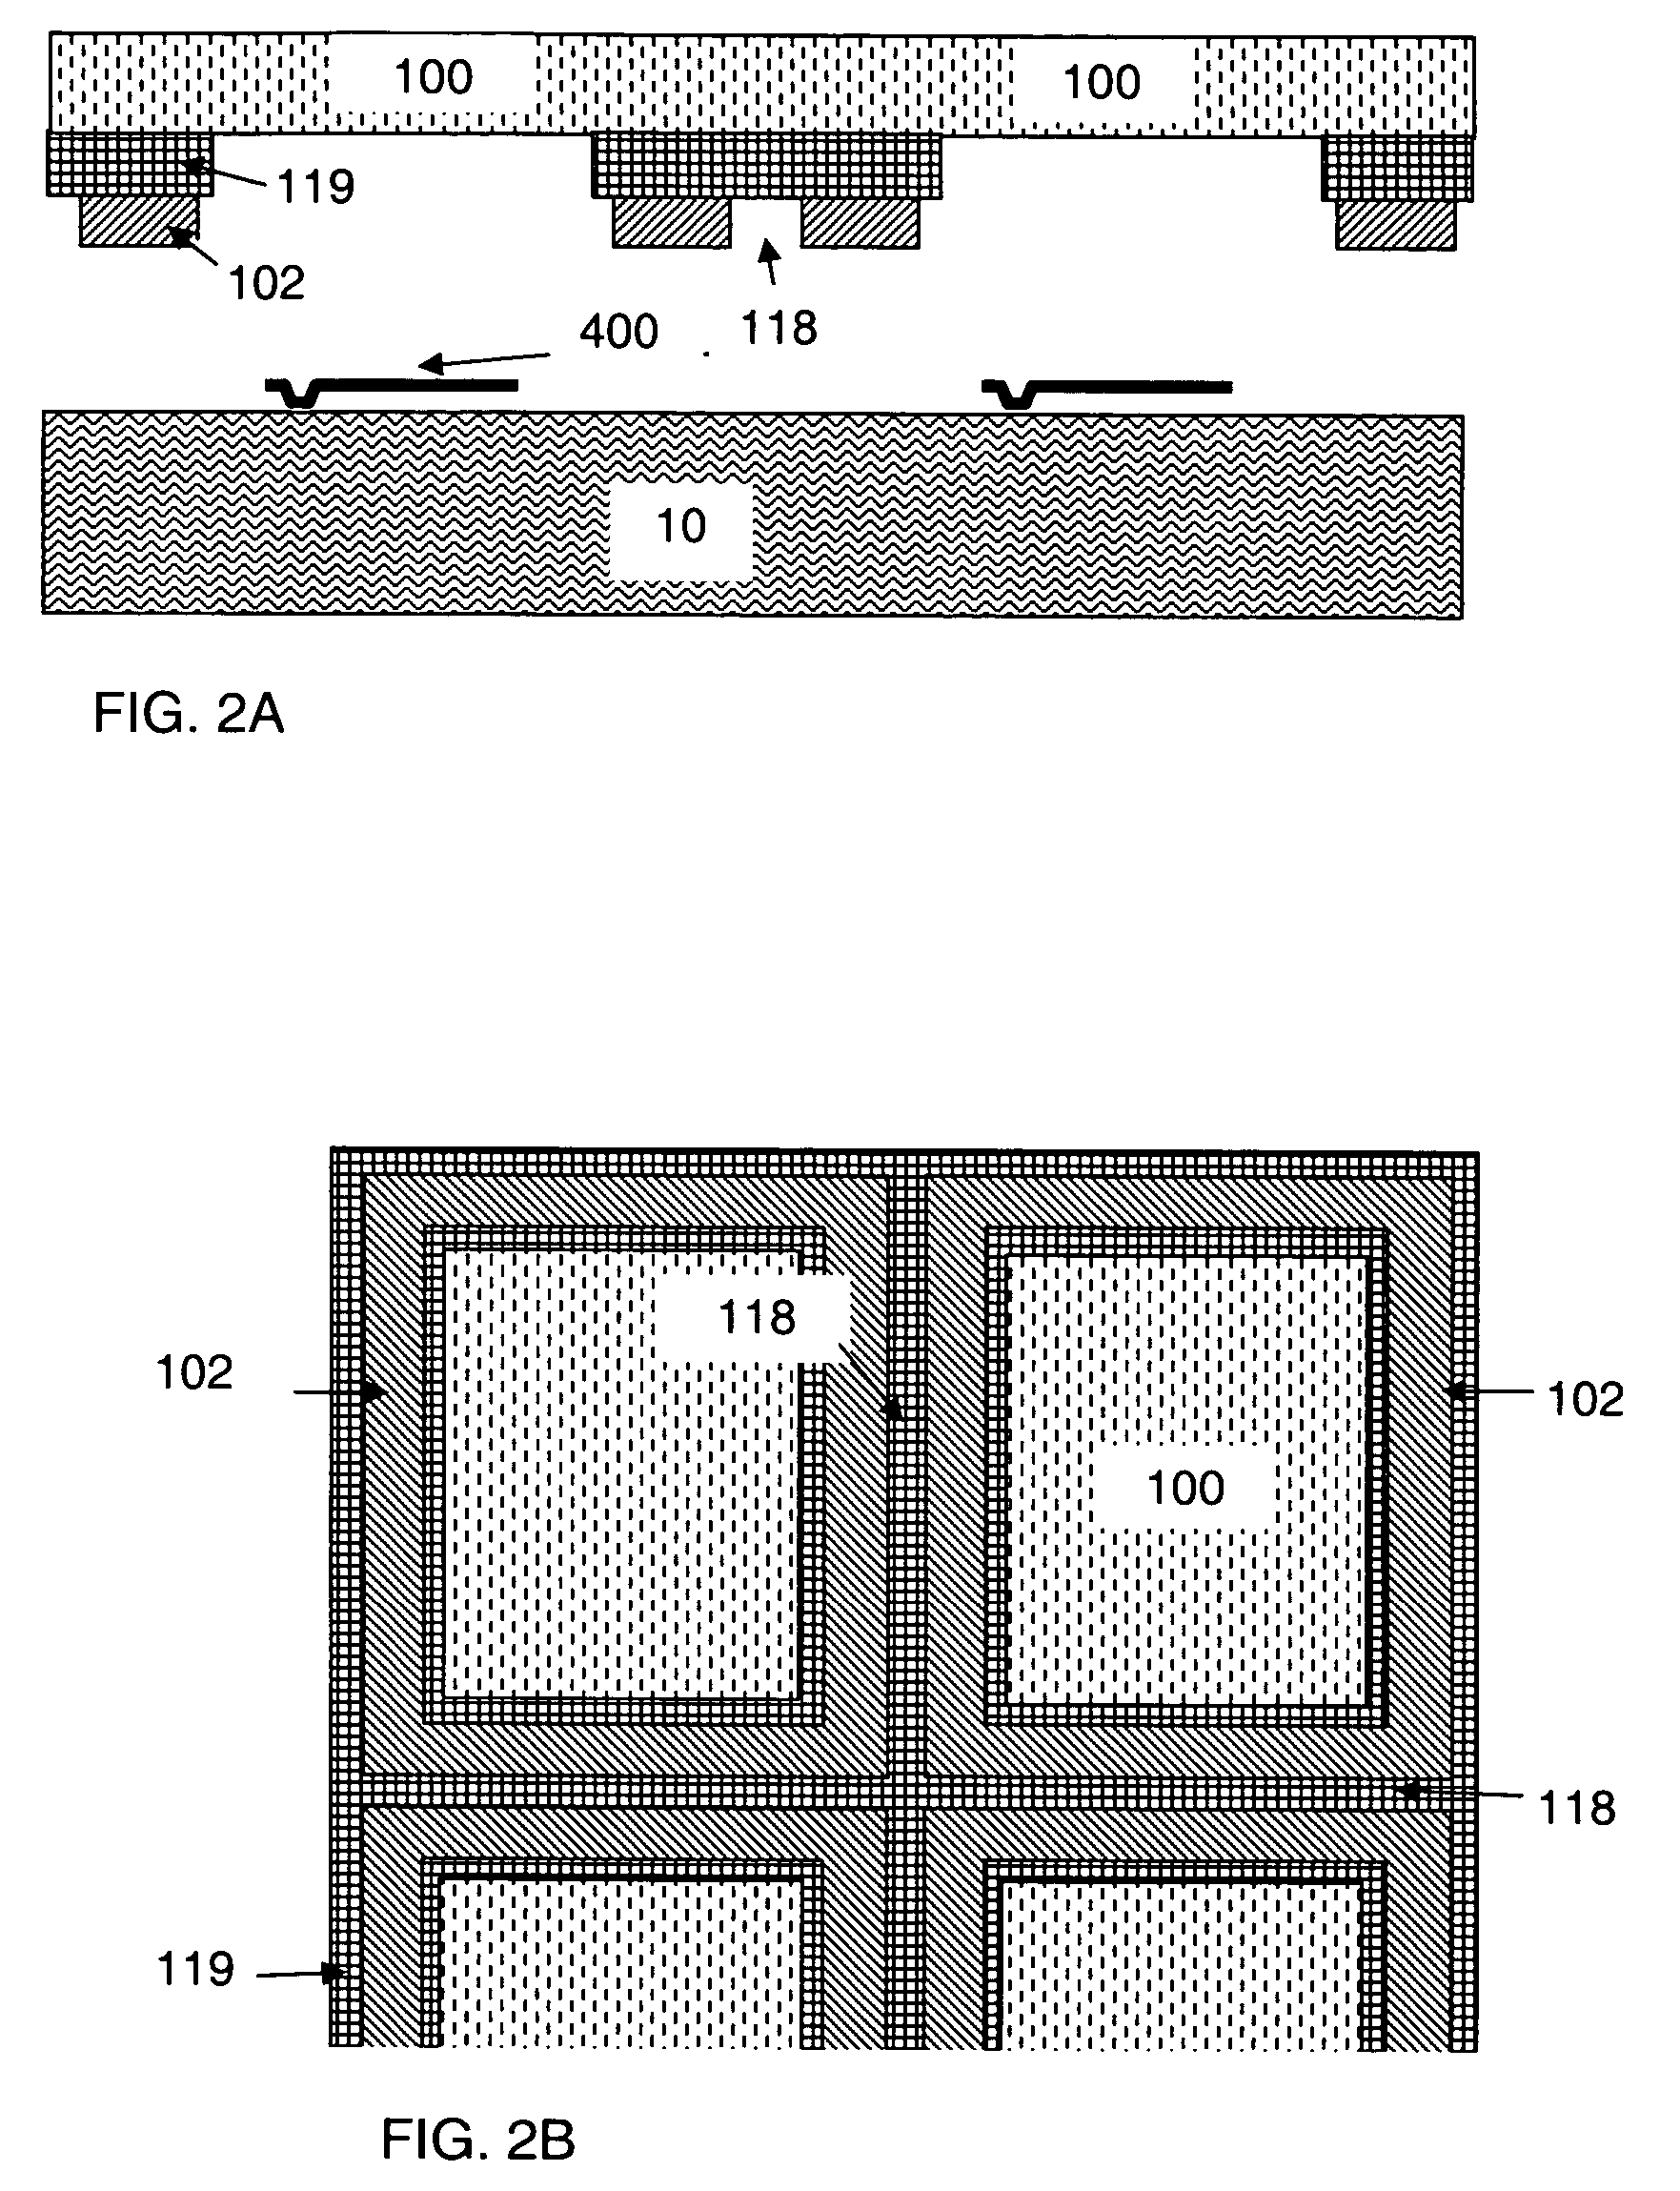 Hermetic pacakging and method of manufacture and use therefore